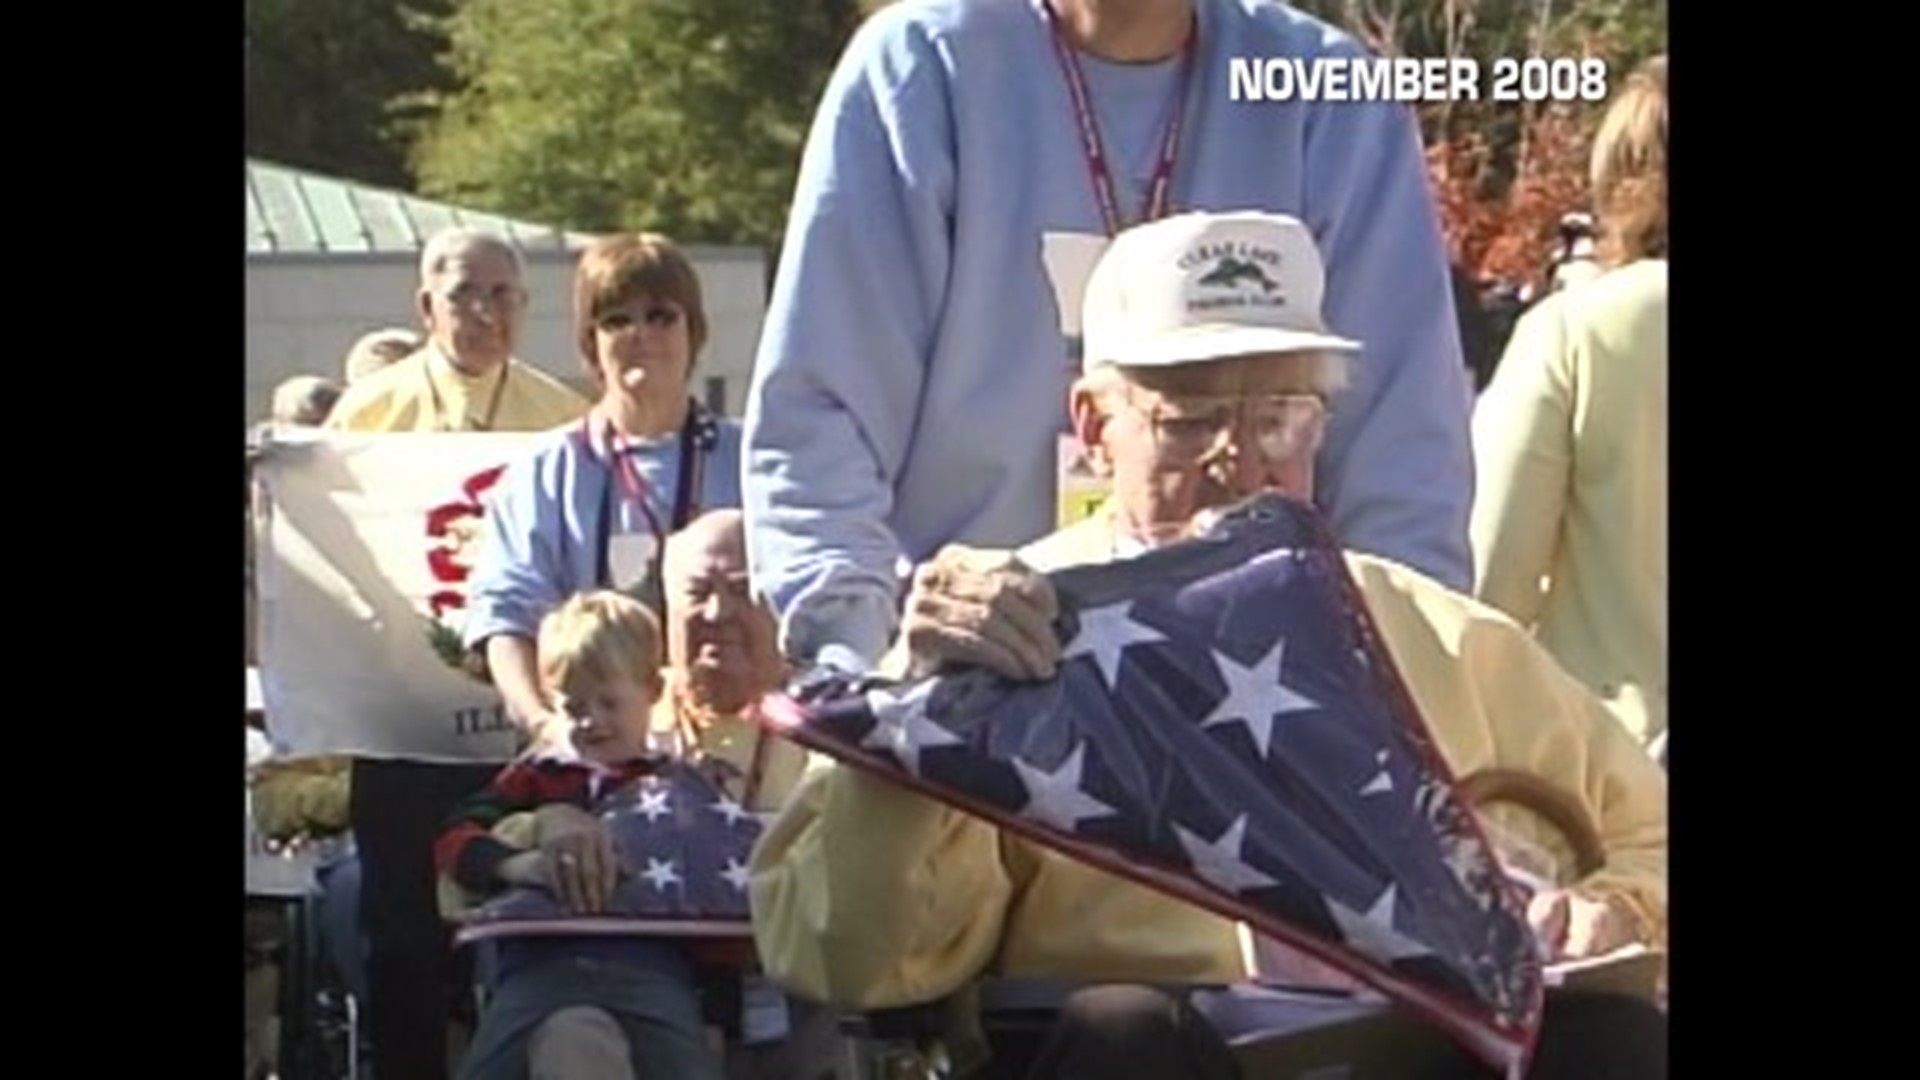 THROWBACK THURSDAY: The First Honor Flight